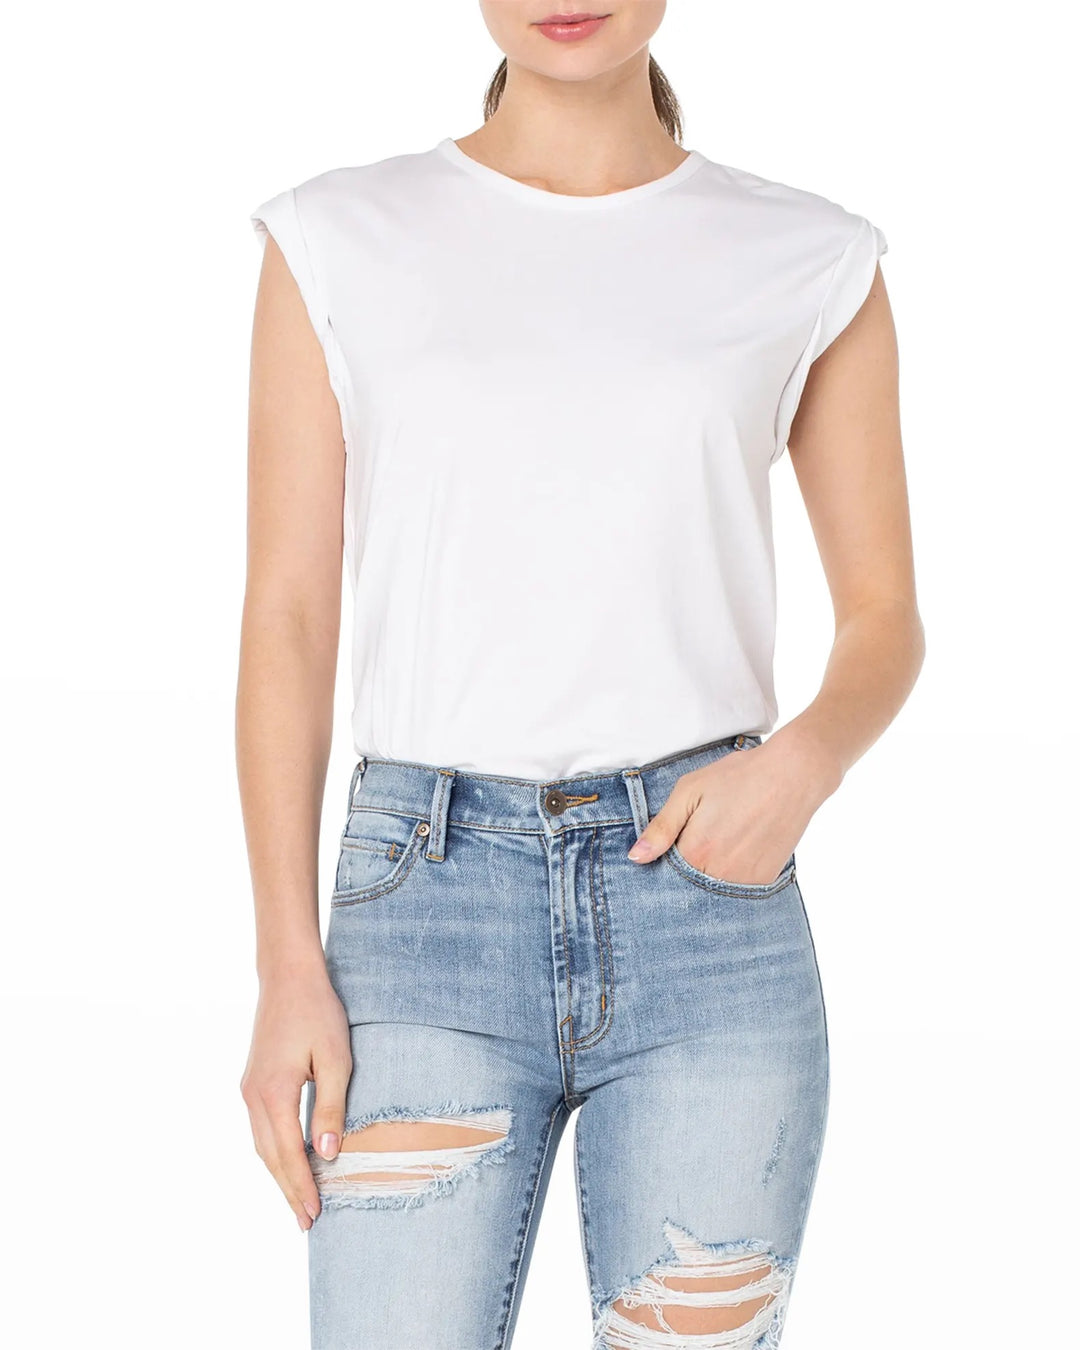 THE ROLLER S/S BASIC TOP - BRILLIANT WHITE - Kingfisher Road - Online Boutique